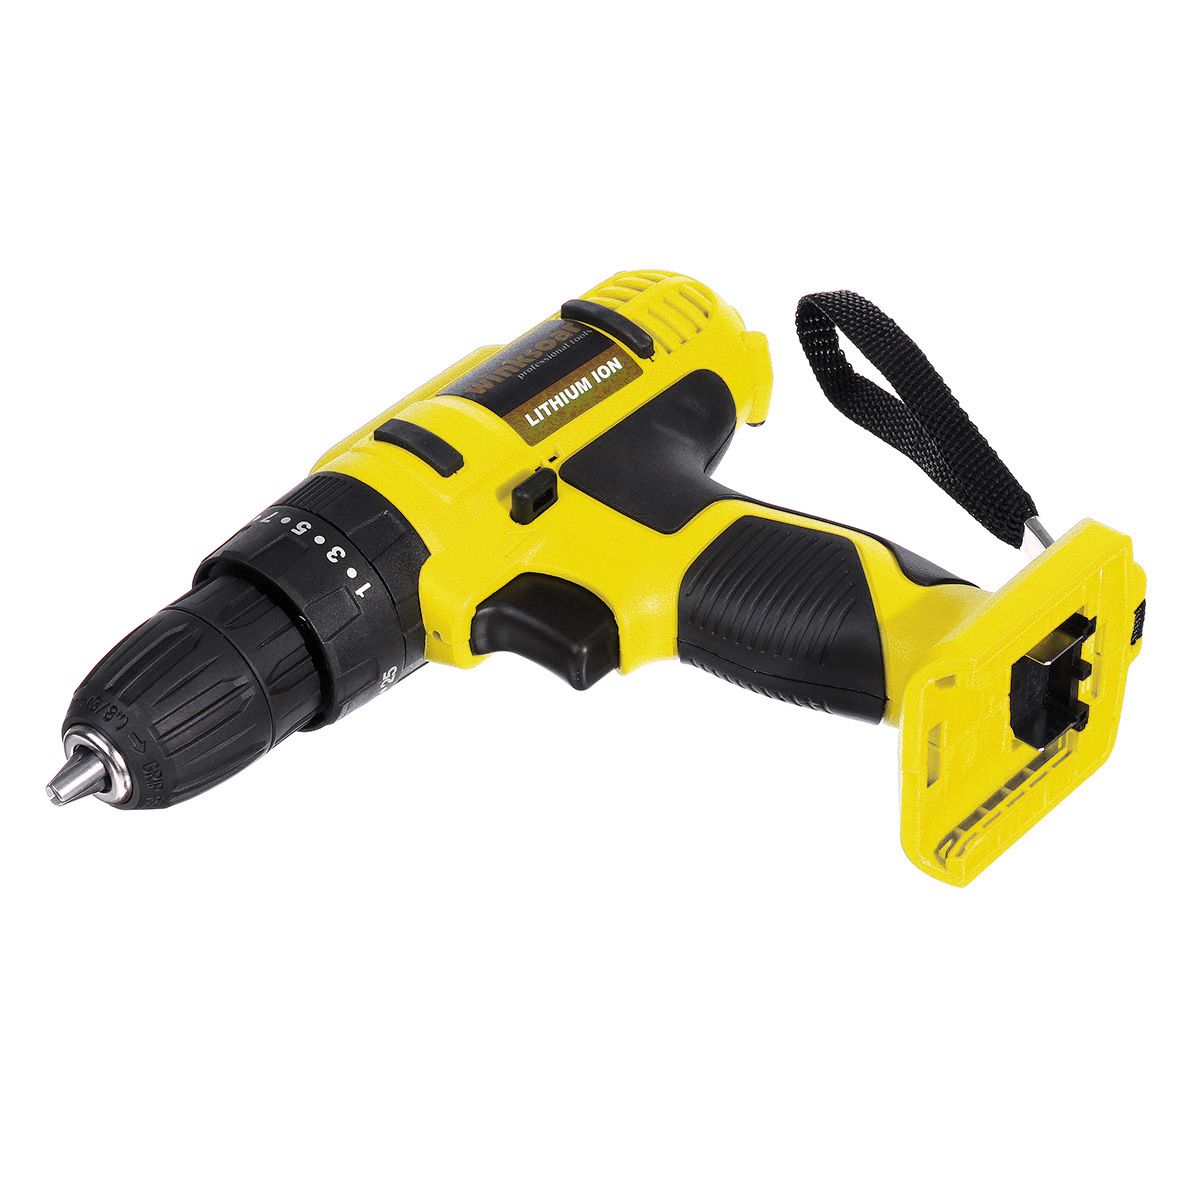 48VF-3000mAh-Electric-Screwdriver-Rechargeable-Power-Impact-Drill-251-Torque-W-1-or-2-Li-ion-Battery-1510743